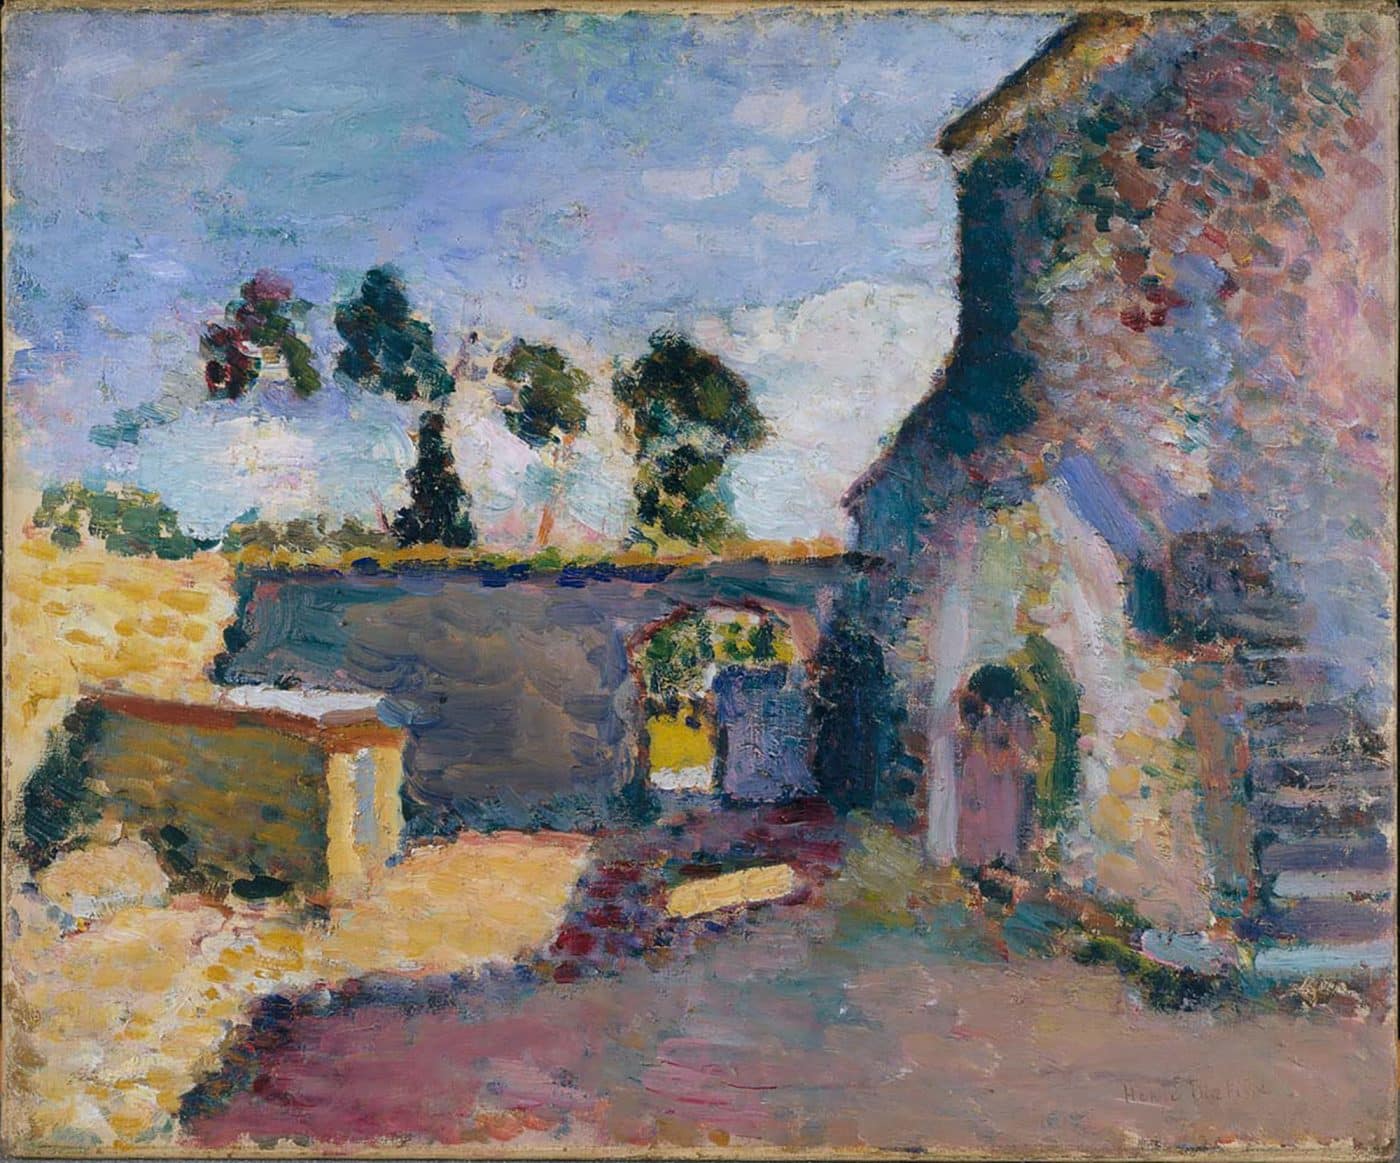 Corsica: The Old Mill, 1898, a painting by Henri Matisse